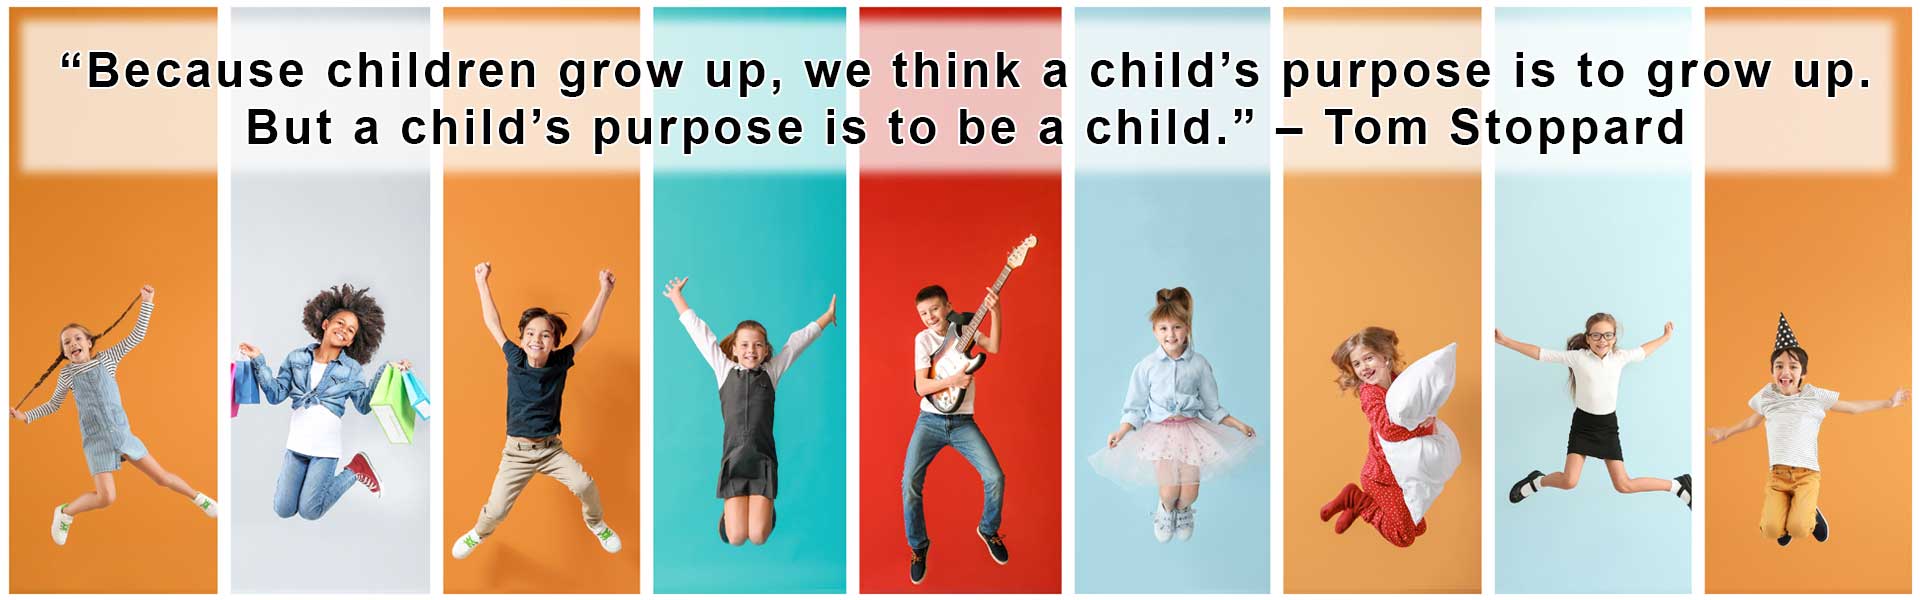 “Because children grow up, we think a child’s purpose is to grow up. But a child’s purpose is to be a child.” – Tom Stoppard